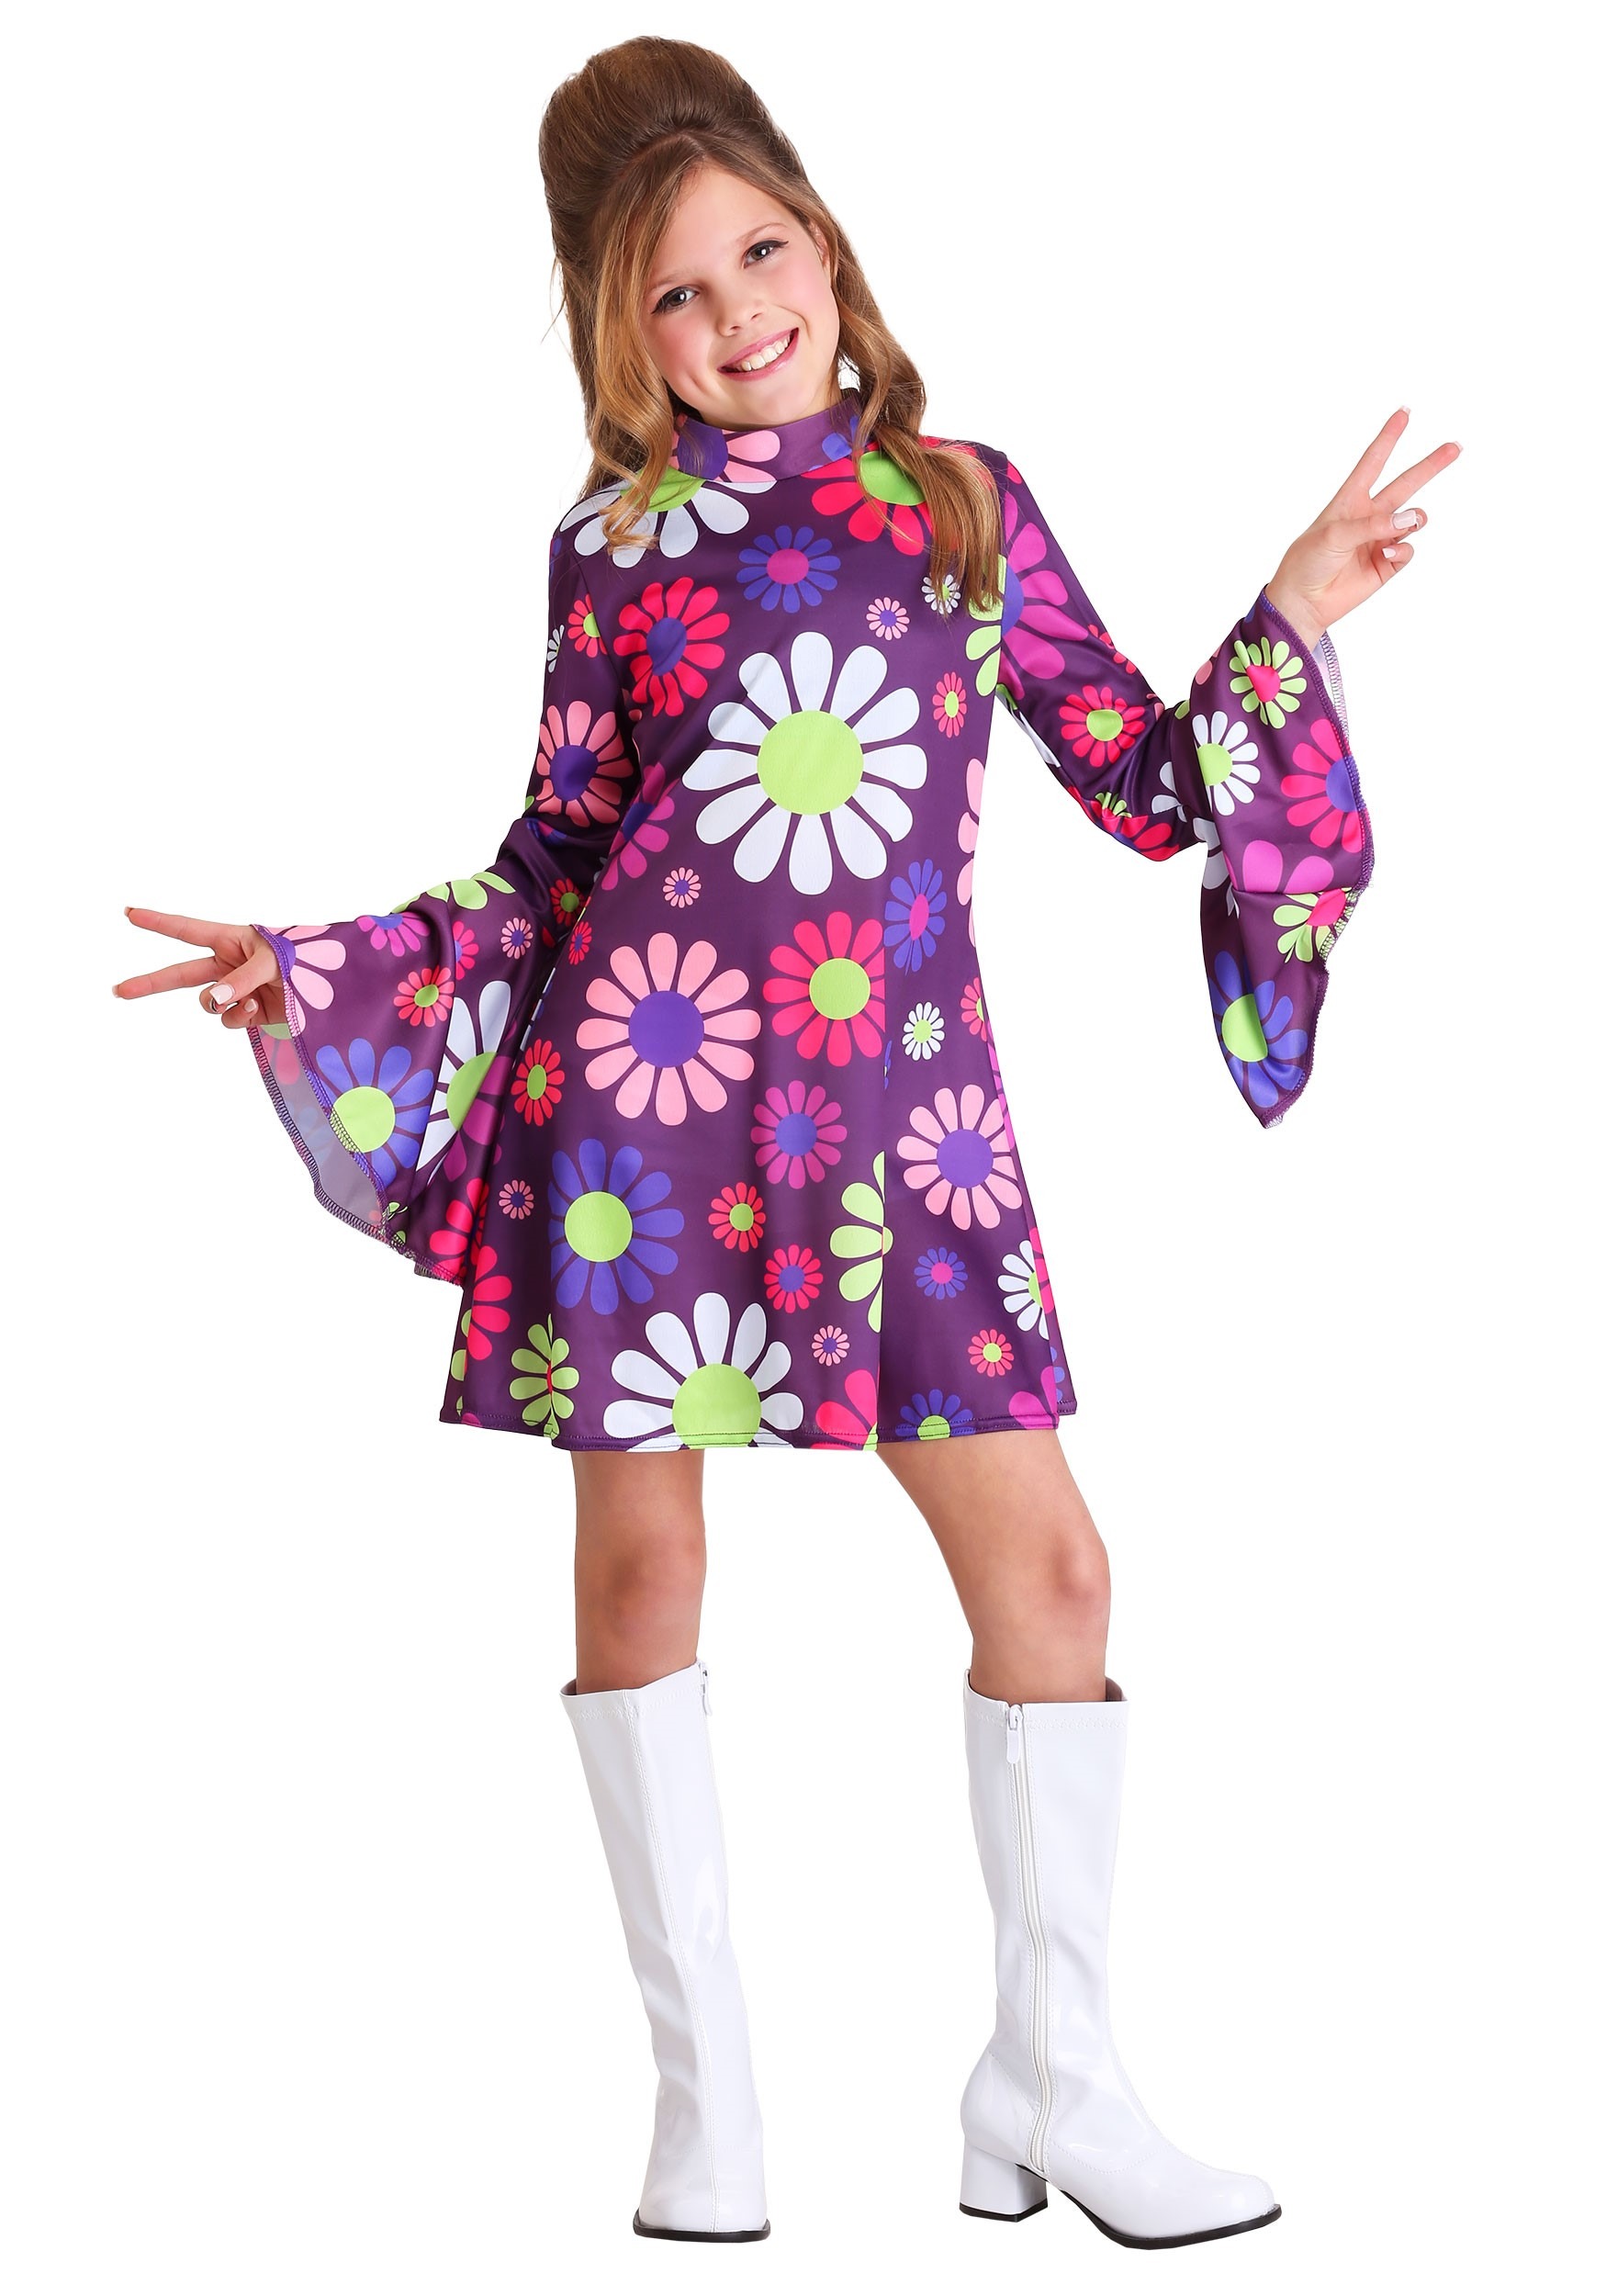 Photos - Fancy Dress FAR FUN Costumes  Out Hippie Costume for Girl's Green/Pink/Purple F 